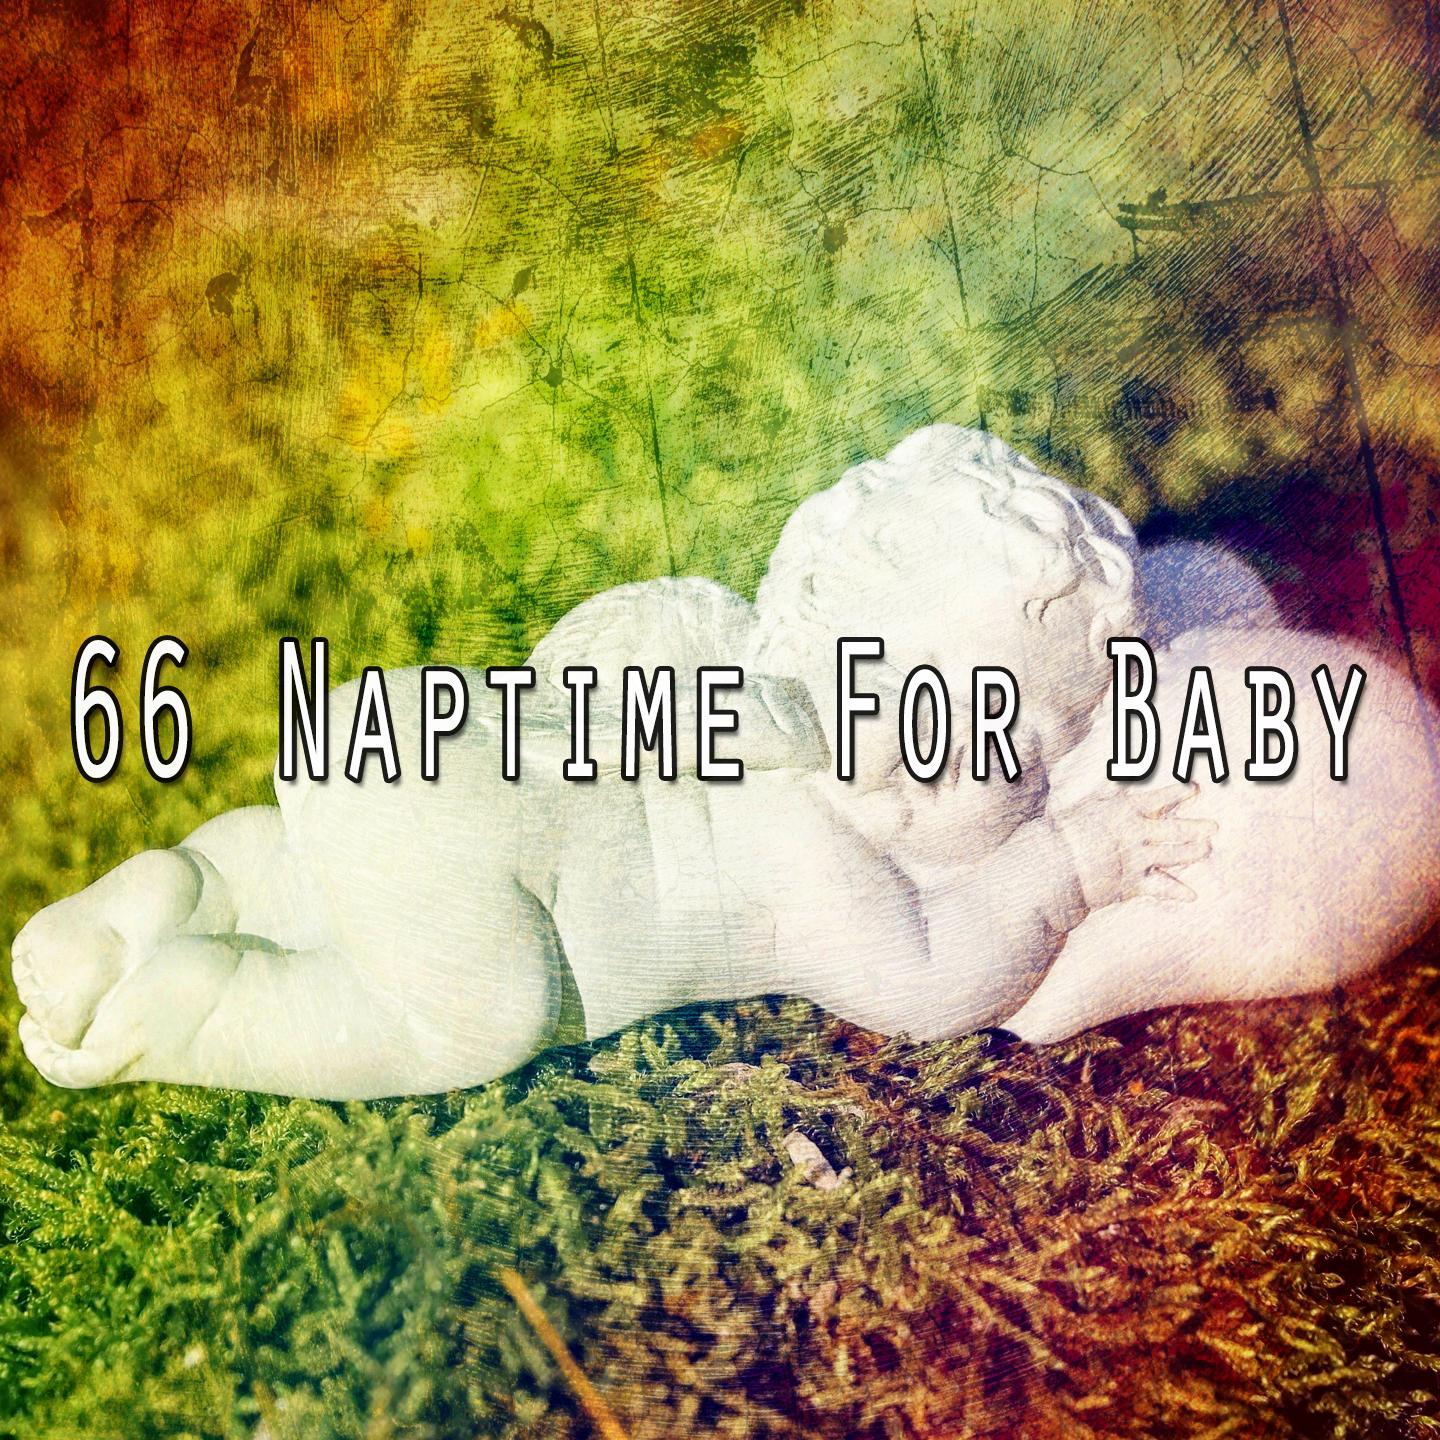 66 Naptime for Baby